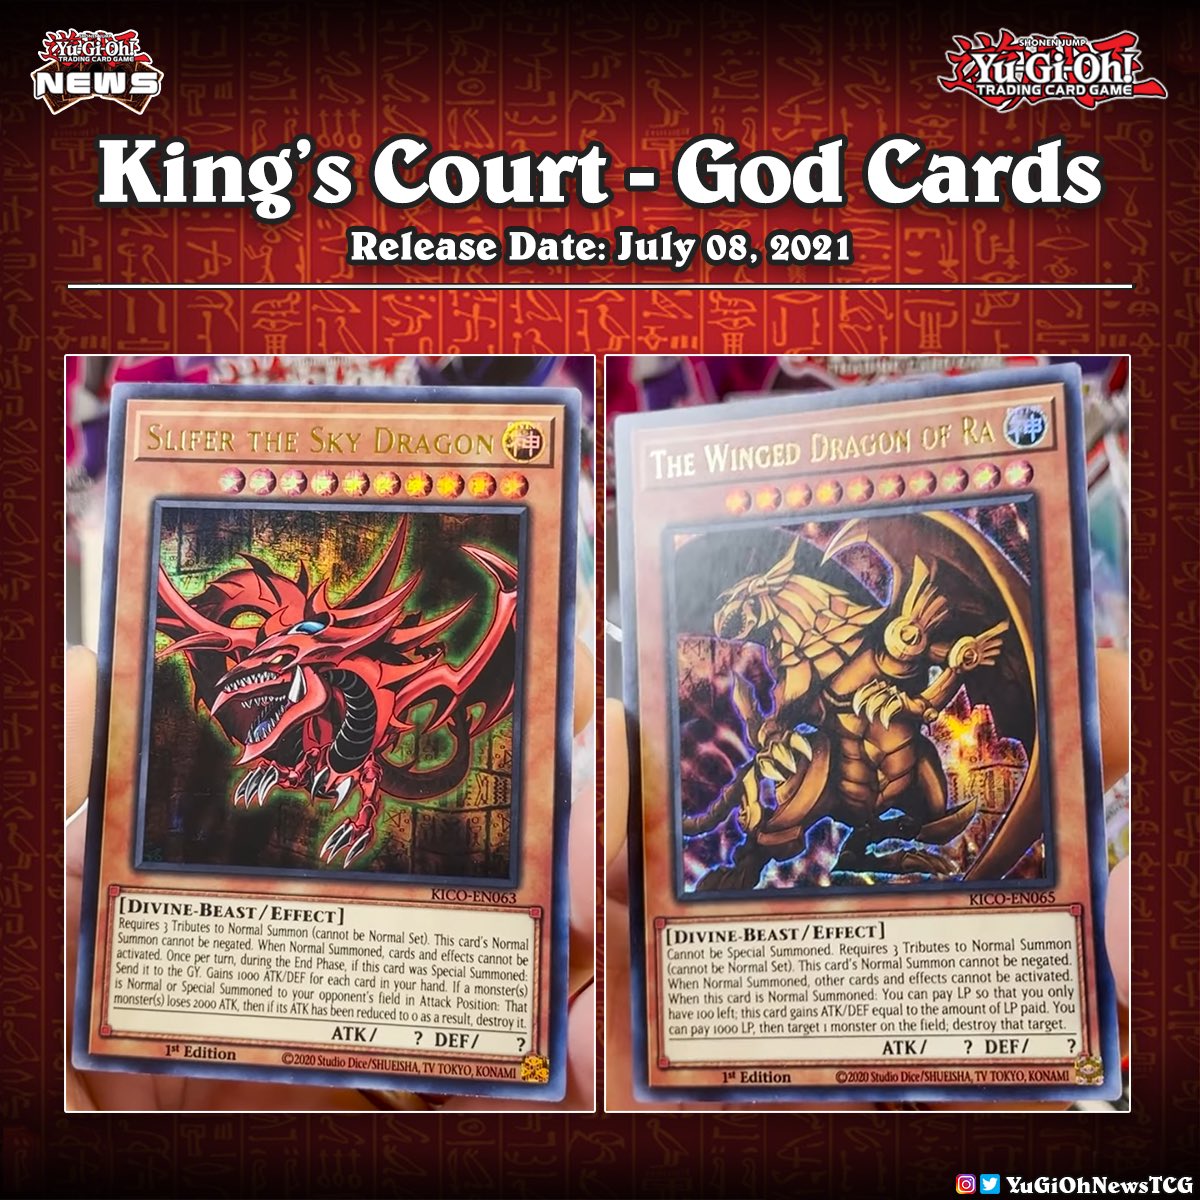 Full Effects of the Egyptian God Cards  ryugioh